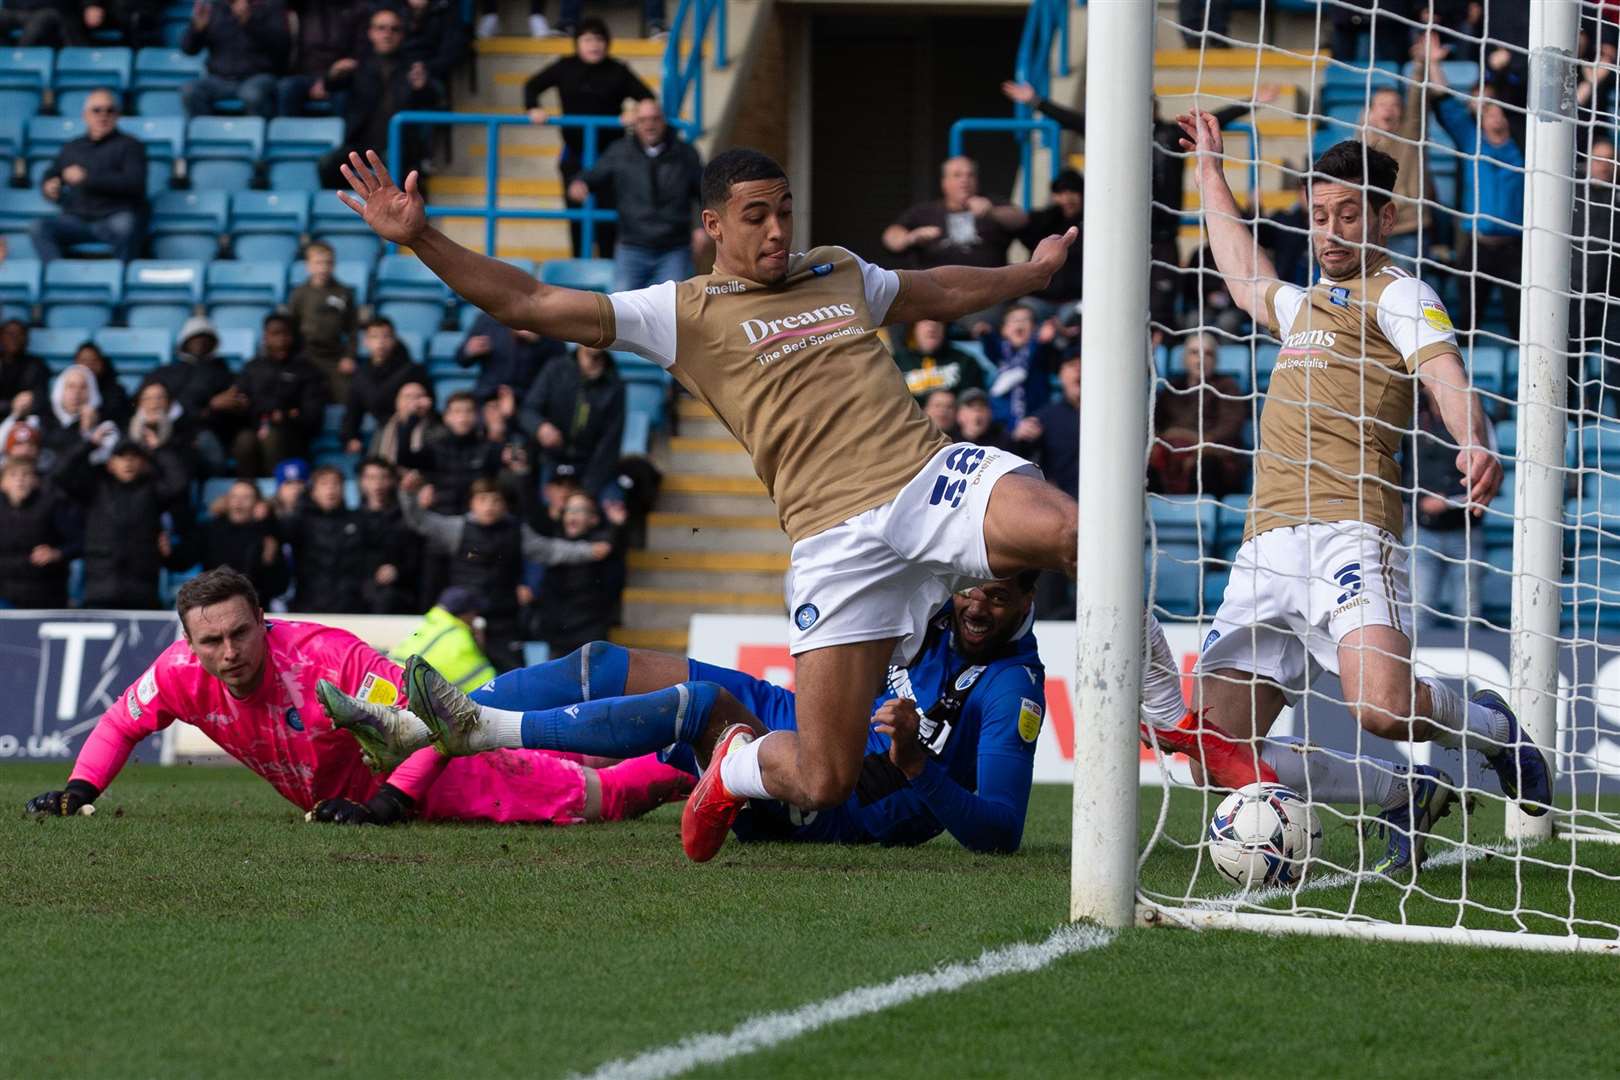 Vadaine Oliver goes close but Wycombe clear off the line at 1-1 Picture: KPI